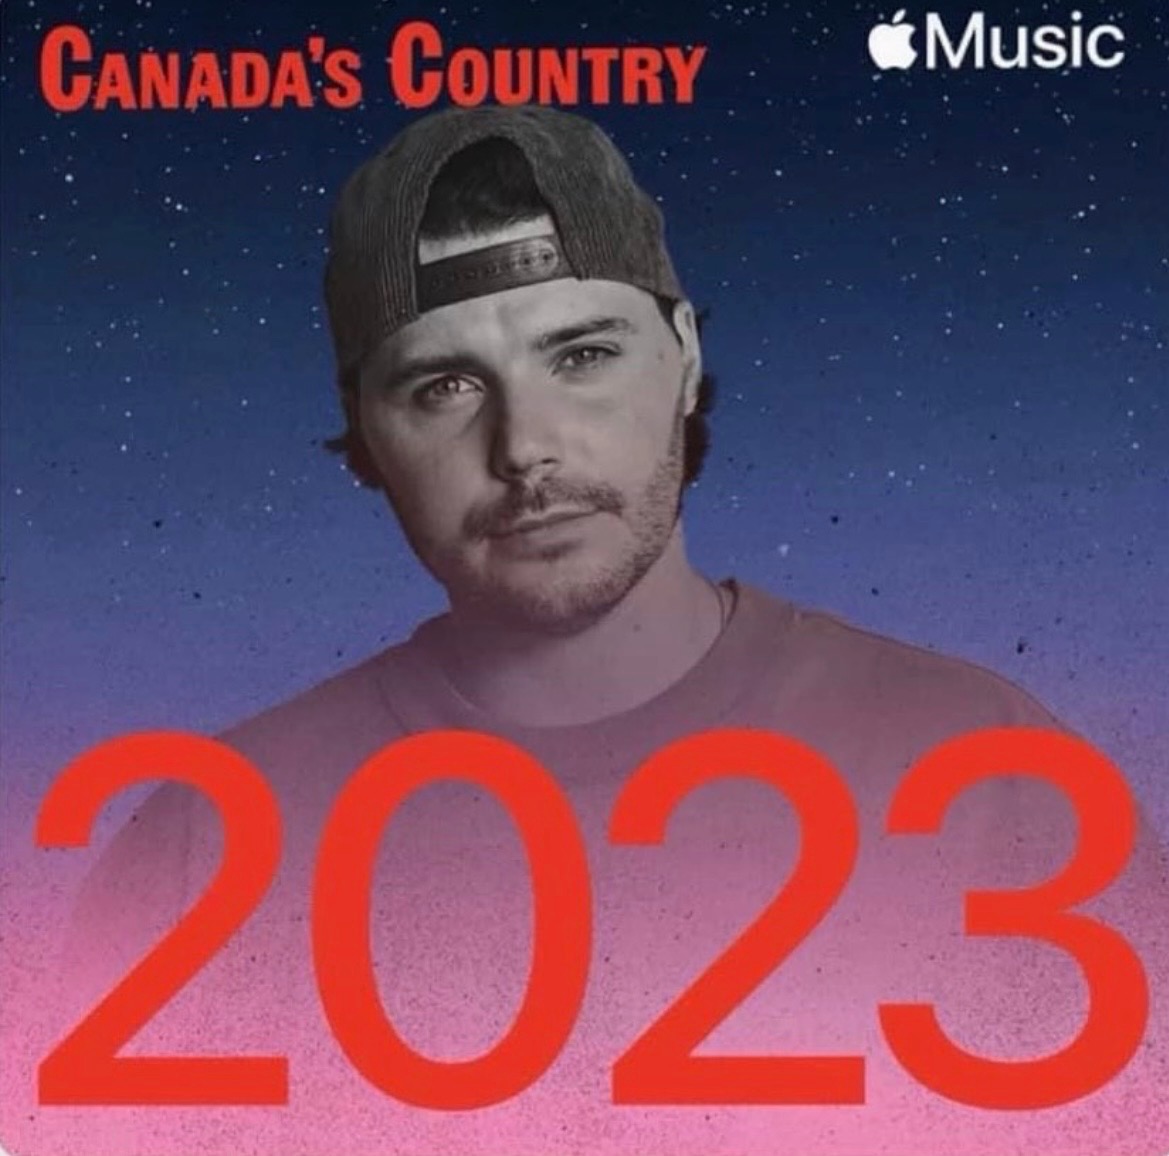 Check out @musicjoshross on the cover of the @AppleMusic's Canada's Country 2023 playlist!🇨🇦 Stream now to hear the hits released this year from your favourite Canadian country artists.